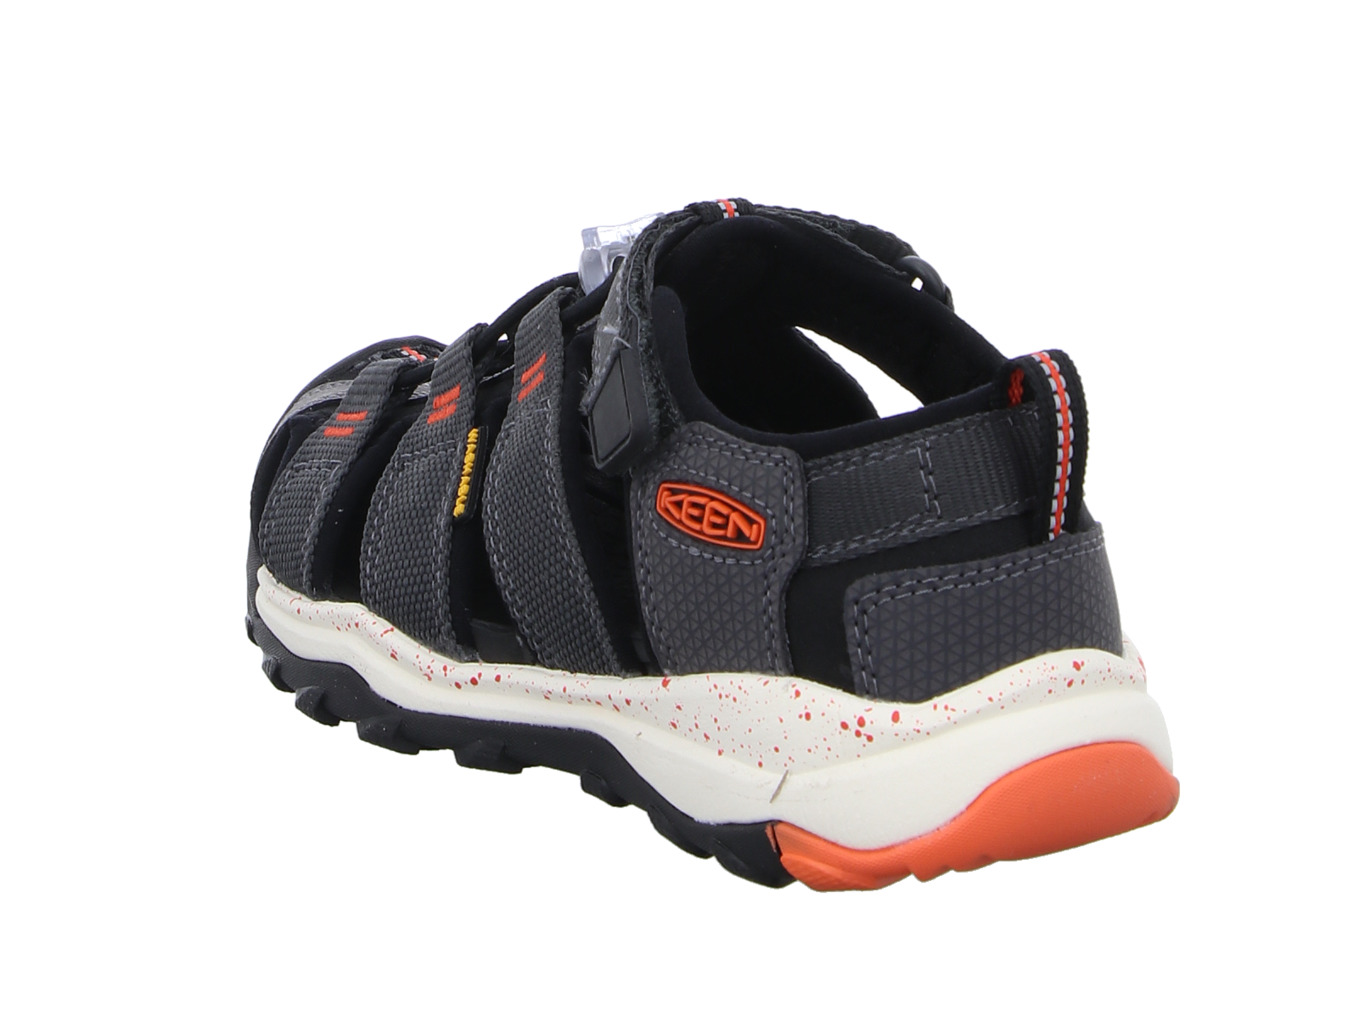 keen_newport_neo_h2_magnet_spicy_or_1018426_na_5166